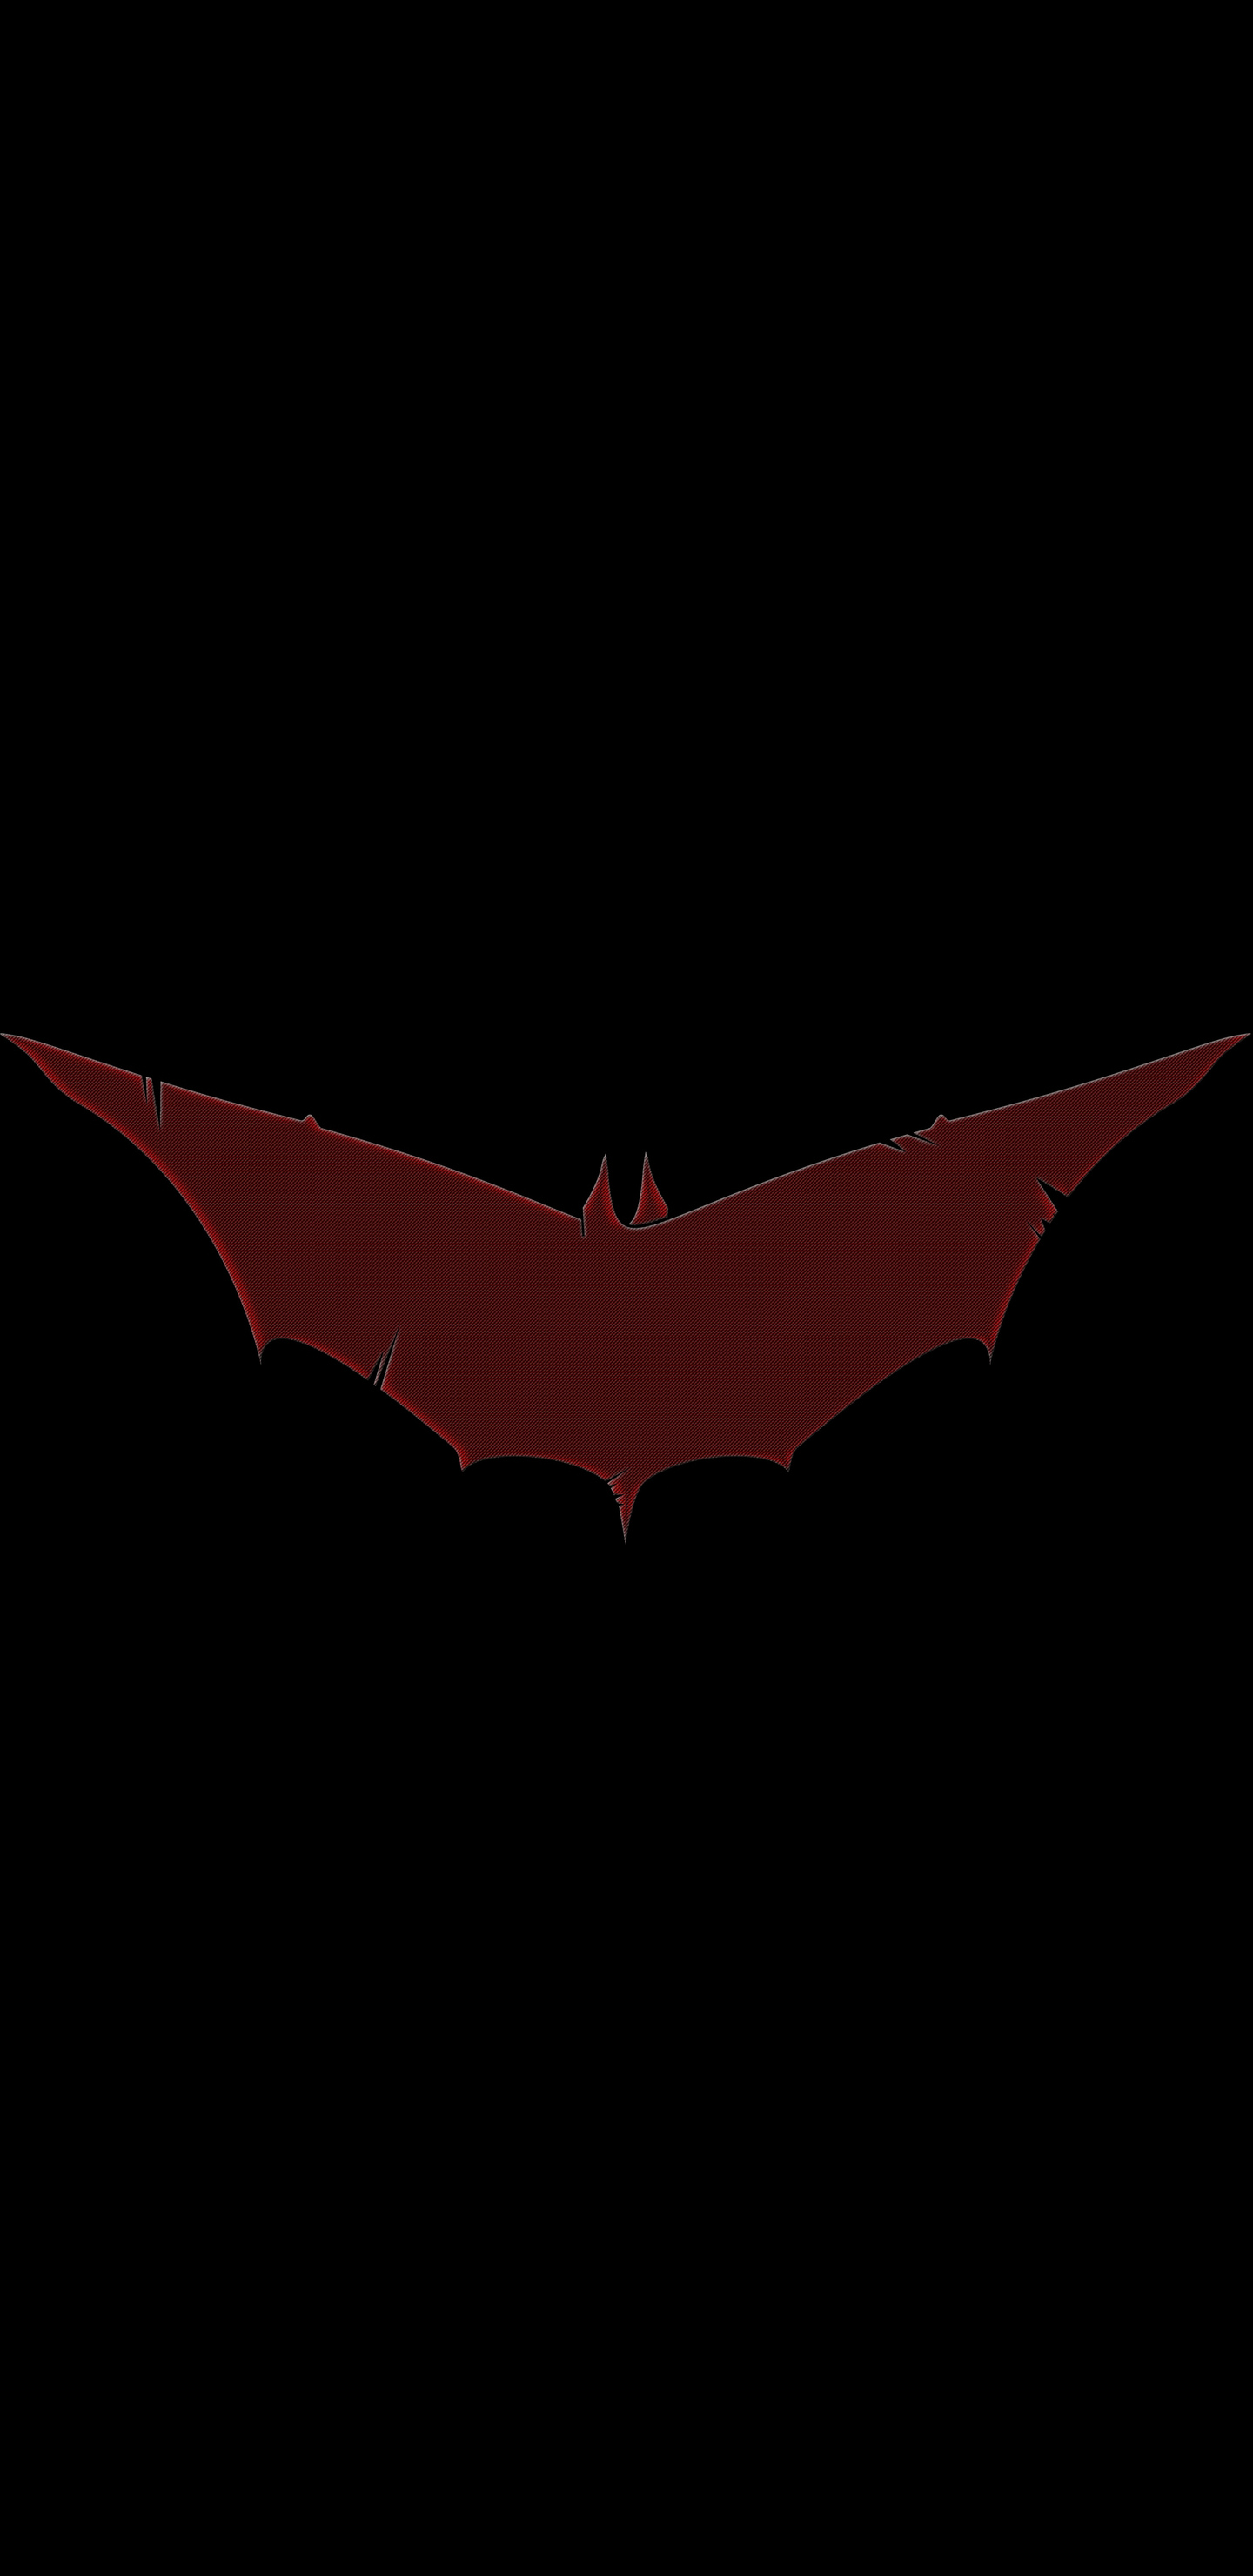 1440x2960 Batman Red Logo 8k Samsung Galaxy Note 9,8, S9,S8,S8+ QHD HD 4k  Wallpapers, Images, Backgrounds, Photos and Pictures